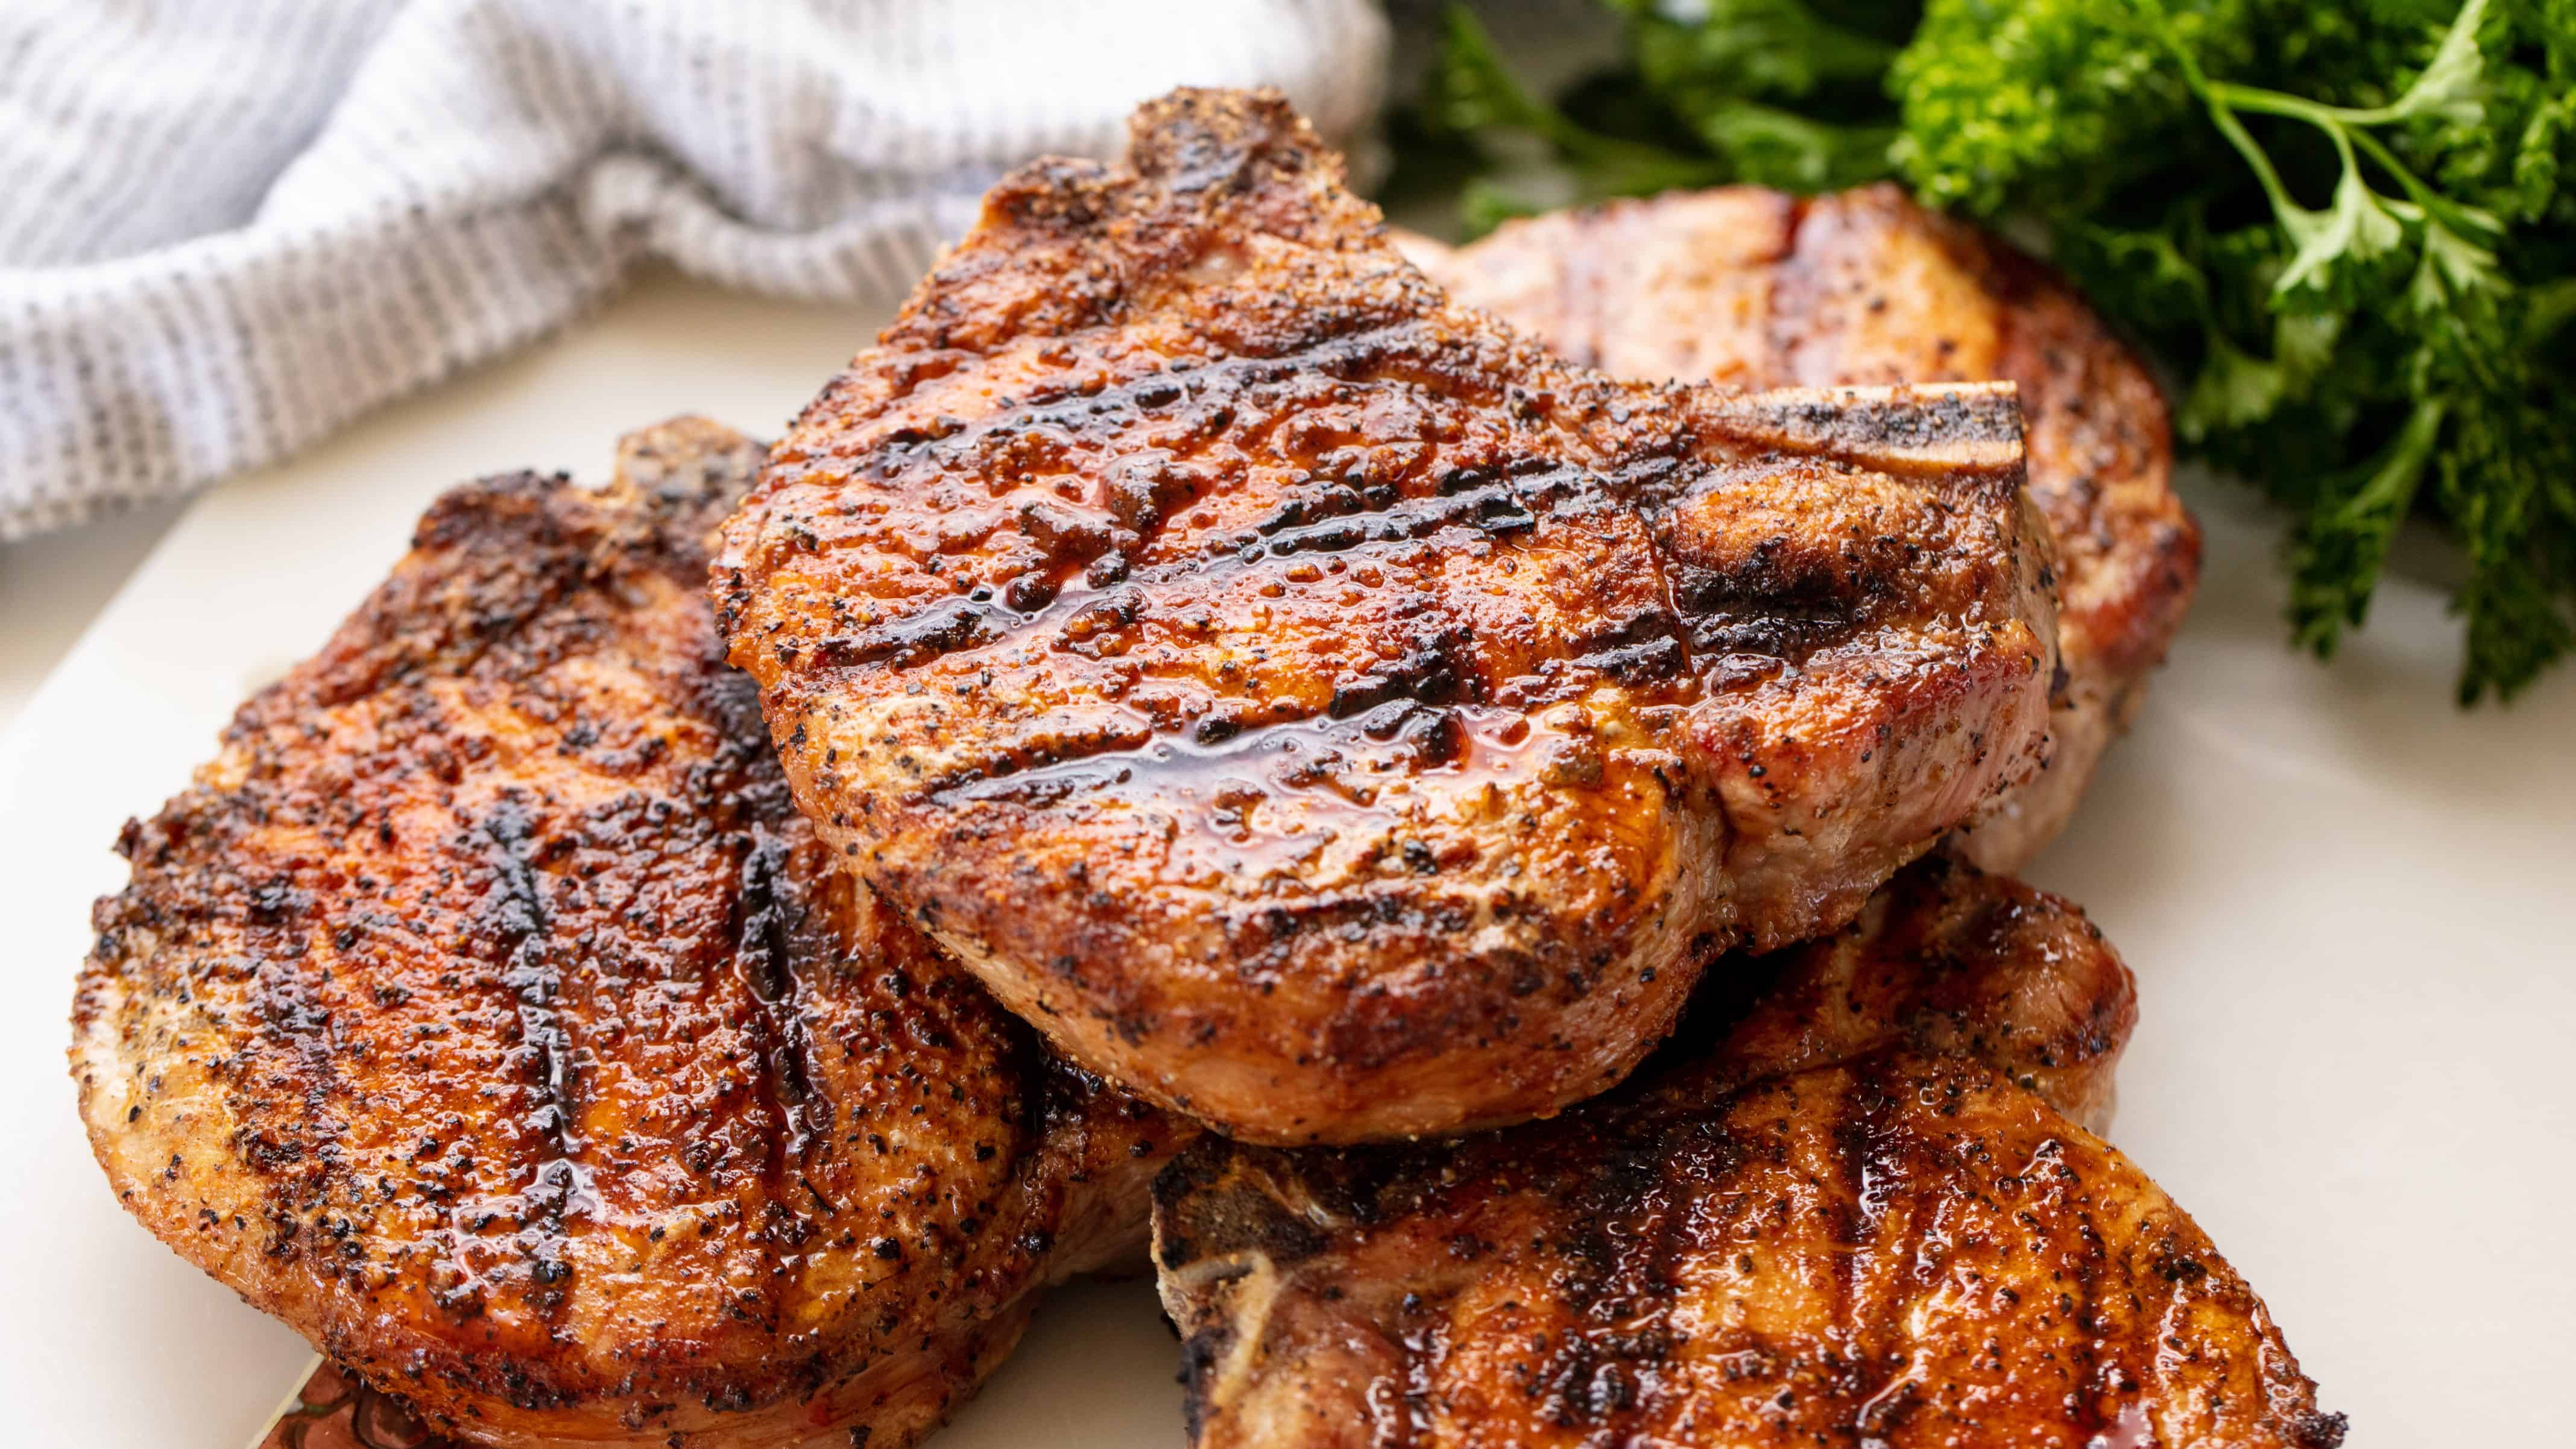 Stack of grilled pork chops on a white plate.